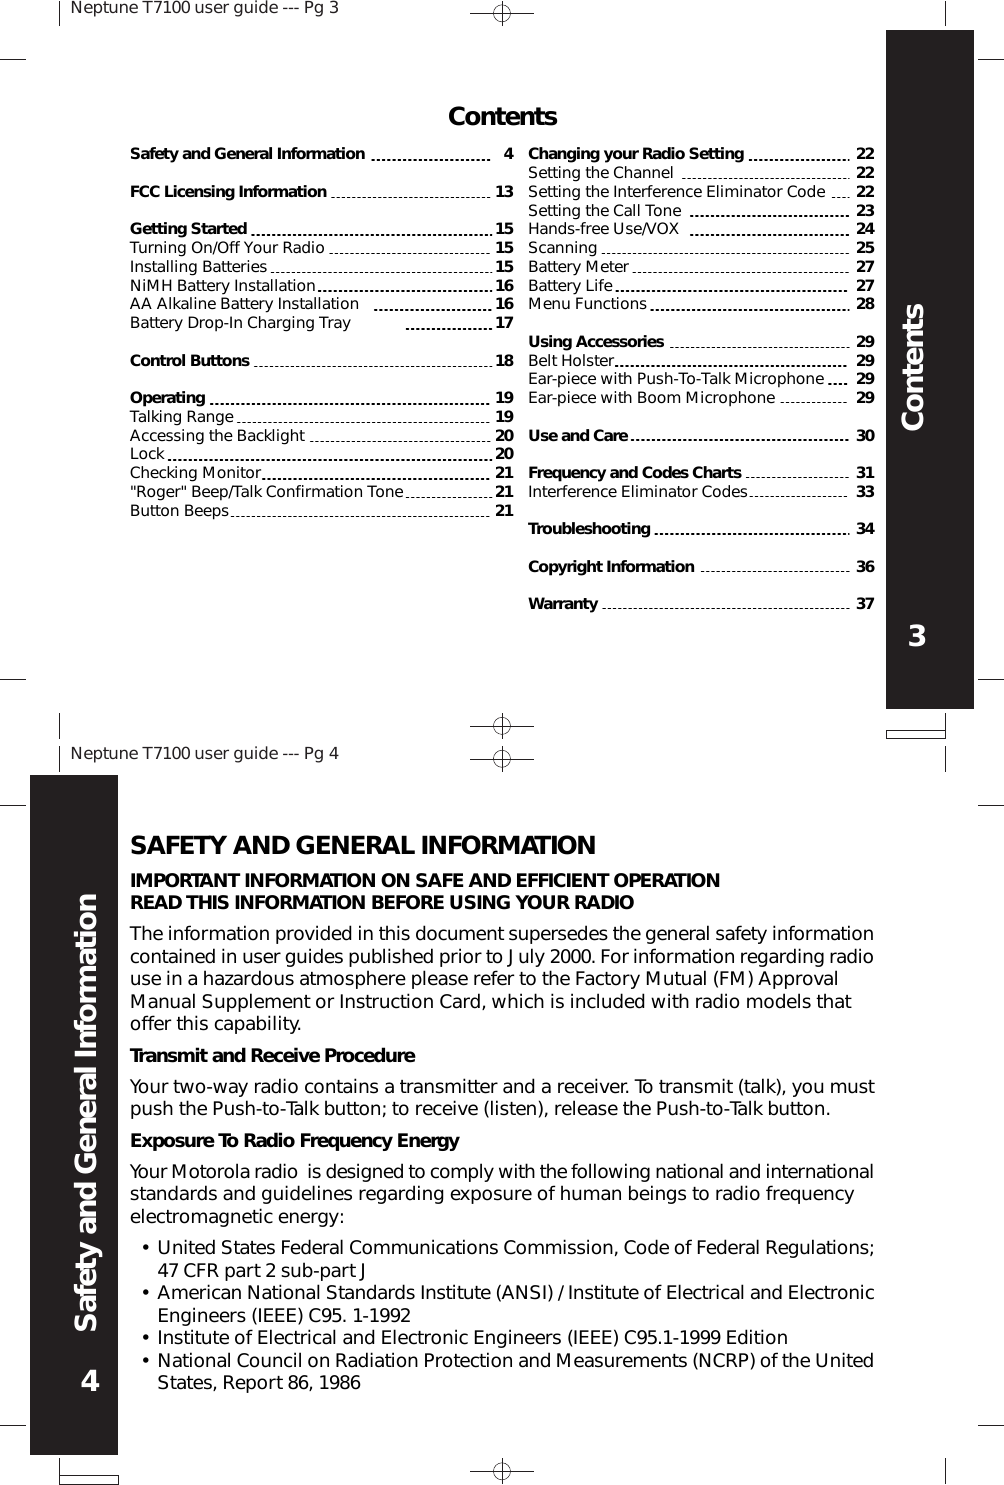 Neptune T7100 user guide --- Pg 33ContentsNeptune T7100 user guide --- Pg 44Safety and General InformationSAFETY AND GENERAL INFORMATIONIMPORTANT INFORMATION ON SAFE AND EFFICIENT OPERATIONREAD THIS INFORMATION BEFORE USING YOUR RADIOThe information provided in this document supersedes the general safety informationcontained in user guides published prior to July 2000. For information regarding radiouse in a hazardous atmosphere please refer to the Factory Mutual (FM) ApprovalManual Supplement or Instruction Card, which is included with radio models thatoffer this capability.Transmit and Receive ProcedureYour two-way radio contains a transmitter and a receiver. To transmit (talk), you mustpush the Push-to-Talk button; to receive (listen), release the Push-to-Talk button.Exposure To Radio Frequency EnergyYour Motorola radio  is designed to comply with the following national and internationalstandards and guidelines regarding exposure of human beings to radio frequencyelectromagnetic energy:••••United States Federal Communications Commission, Code of Federal Regulations;47 CFR part 2 sub-part JAmerican National Standards Institute (ANSI) / Institute of Electrical and ElectronicEngineers (IEEE) C95. 1-1992Institute of Electrical and Electronic Engineers (IEEE) C95.1-1999 EditionNational Council on Radiation Protection and Measurements (NCRP) of the UnitedStates, Report 86, 19864131515151616171819192020212121Changing your Radio SettingSetting the ChannelSetting the Interference Eliminator CodeSetting the Call ToneHands-free Use/VOXScanningBattery MeterBattery LifeMenu FunctionsUsing AccessoriesBelt HolsterEar-piece with Push-To-Talk MicrophoneEar-piece with Boom MicrophoneUse and CareFrequency and Codes ChartsInterference Eliminator CodesTroubleshootingCopyright InformationWarranty22222223242527272829292929303133343637Safety and General InformationFCC Licensing InformationGetting StartedTurning On/Off Your RadioInstalling BatteriesNiMH Battery InstallationAA Alkaline Battery InstallationBattery Drop-In Charging TrayControl ButtonsOperatingTalking RangeAccessing the BacklightLockChecking Monitor&quot;Roger&quot; Beep/Talk Confirmation ToneButton BeepsContents